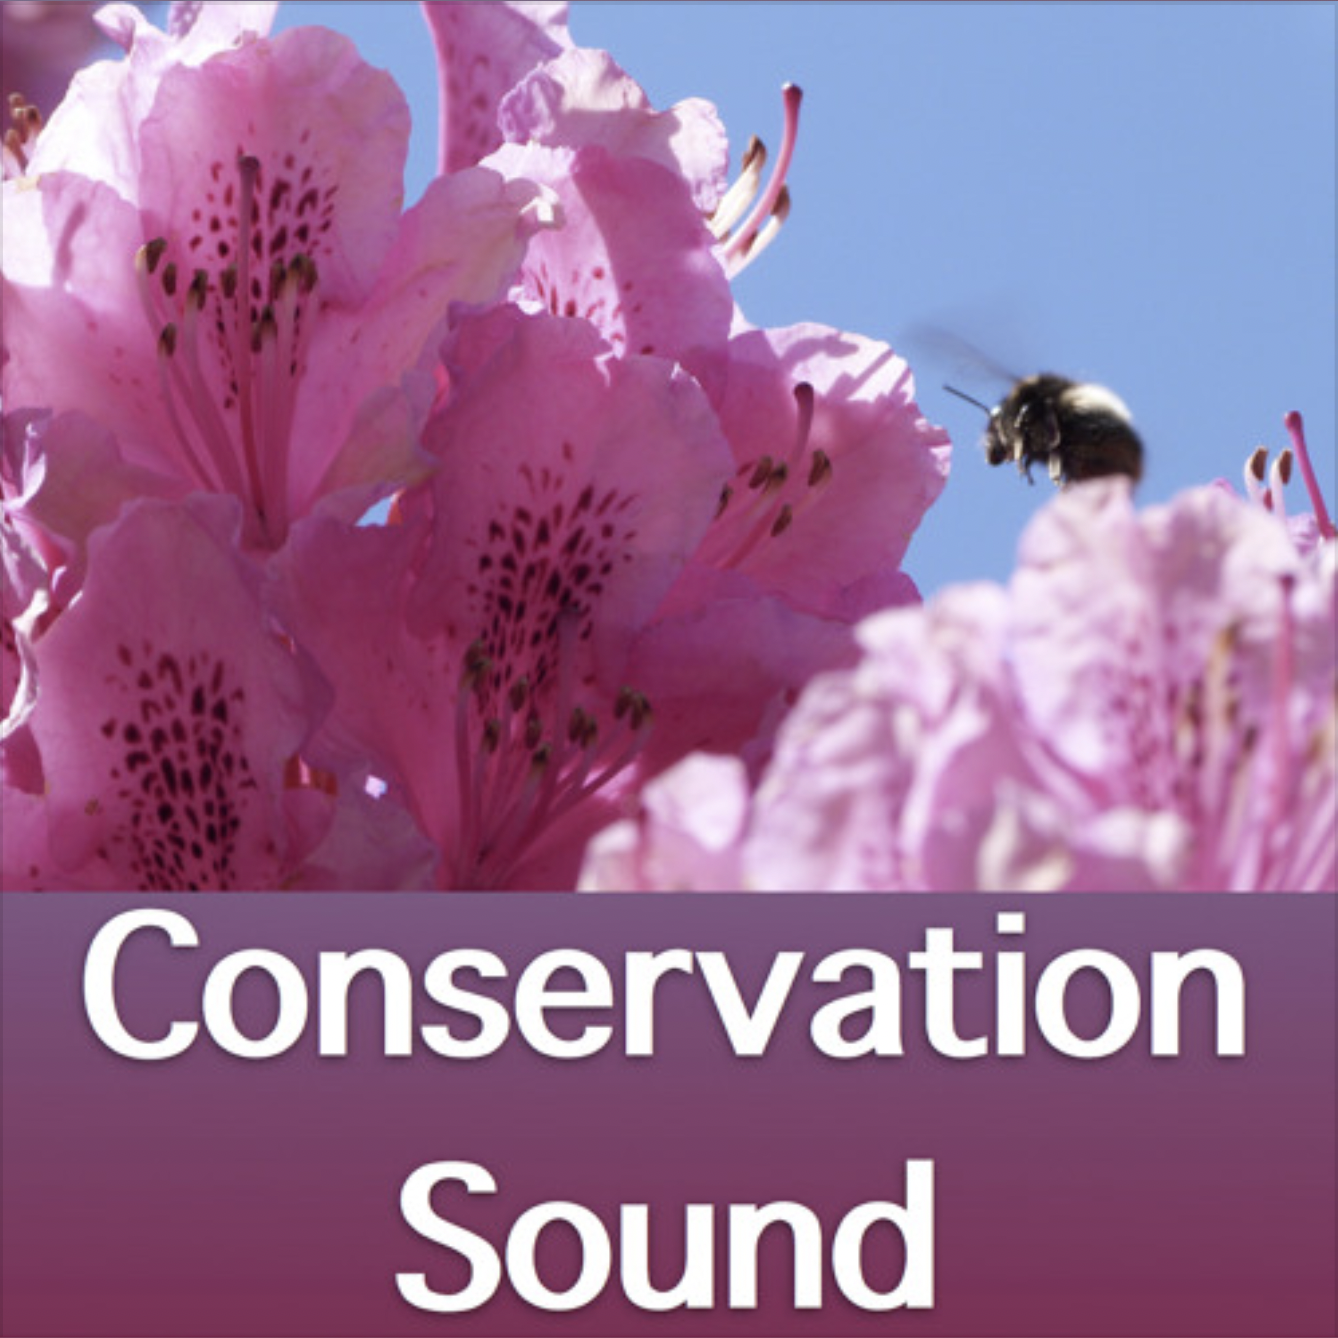 Conservation Sound podcast logo featuring a bumblebee visiting a pink flower.